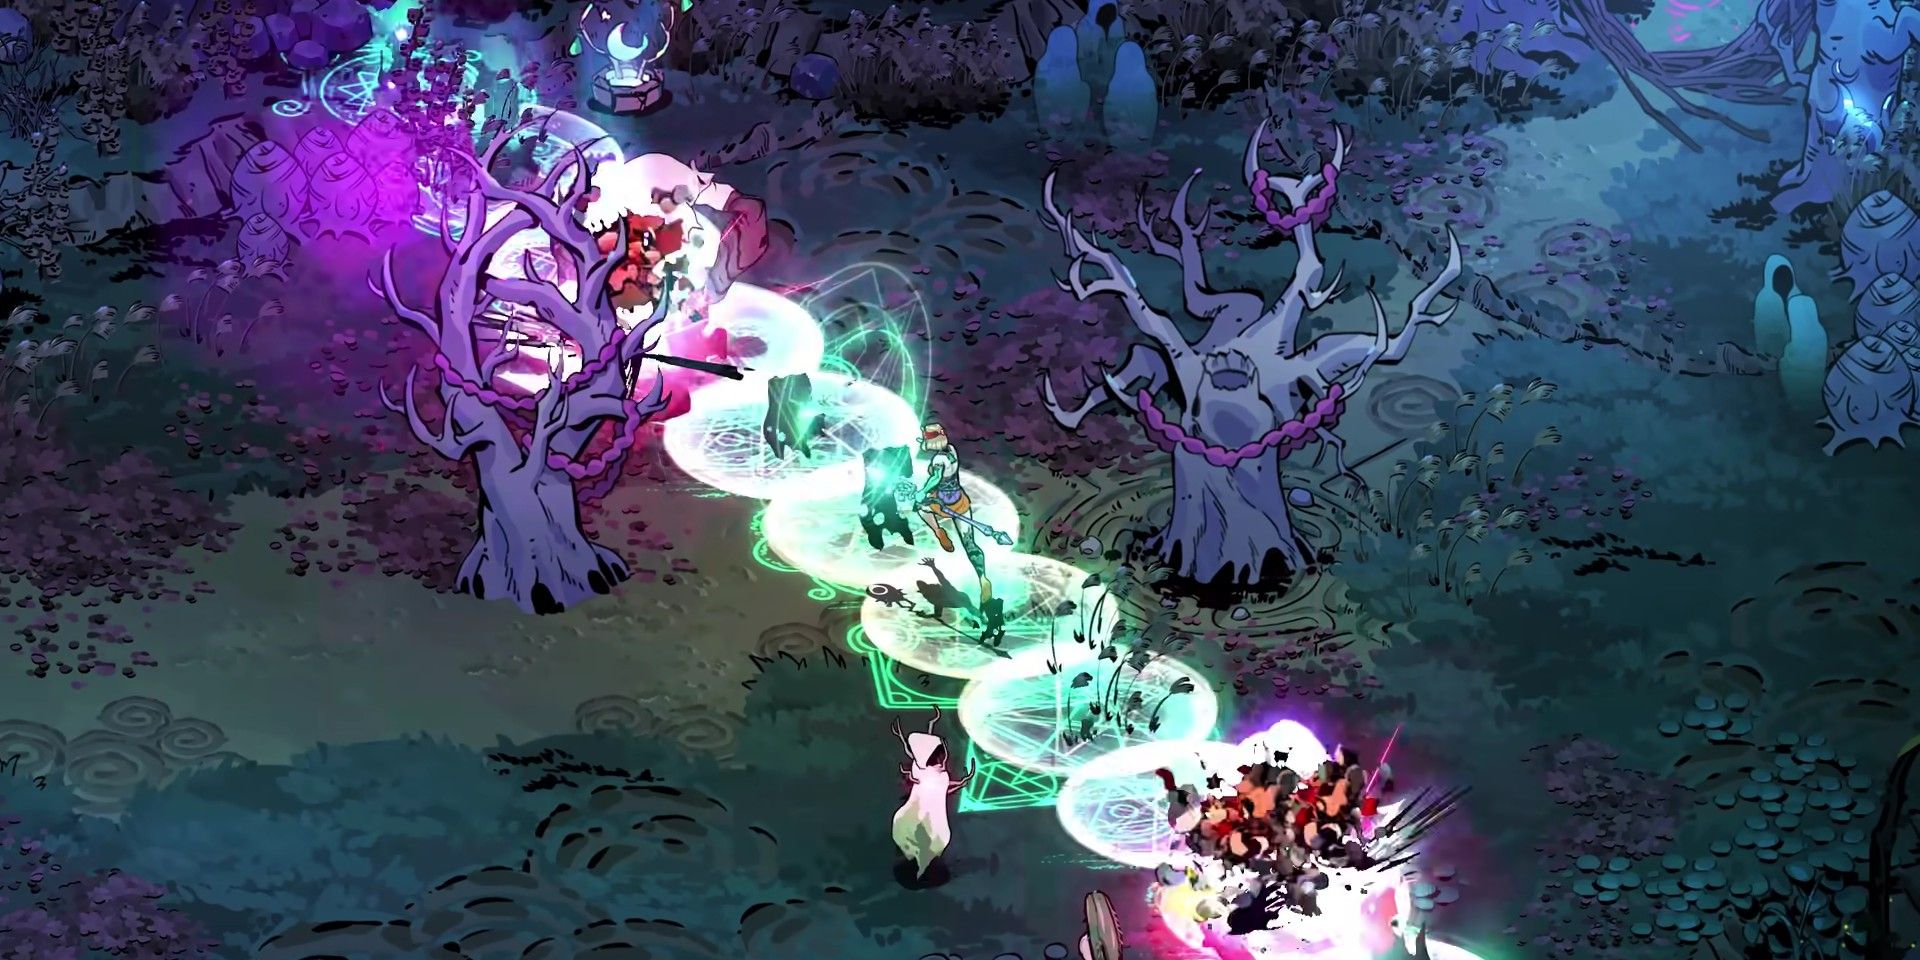 Hades 2 screenshot of Melinoe casting a magical spell at a group of enemies in a forest-like area